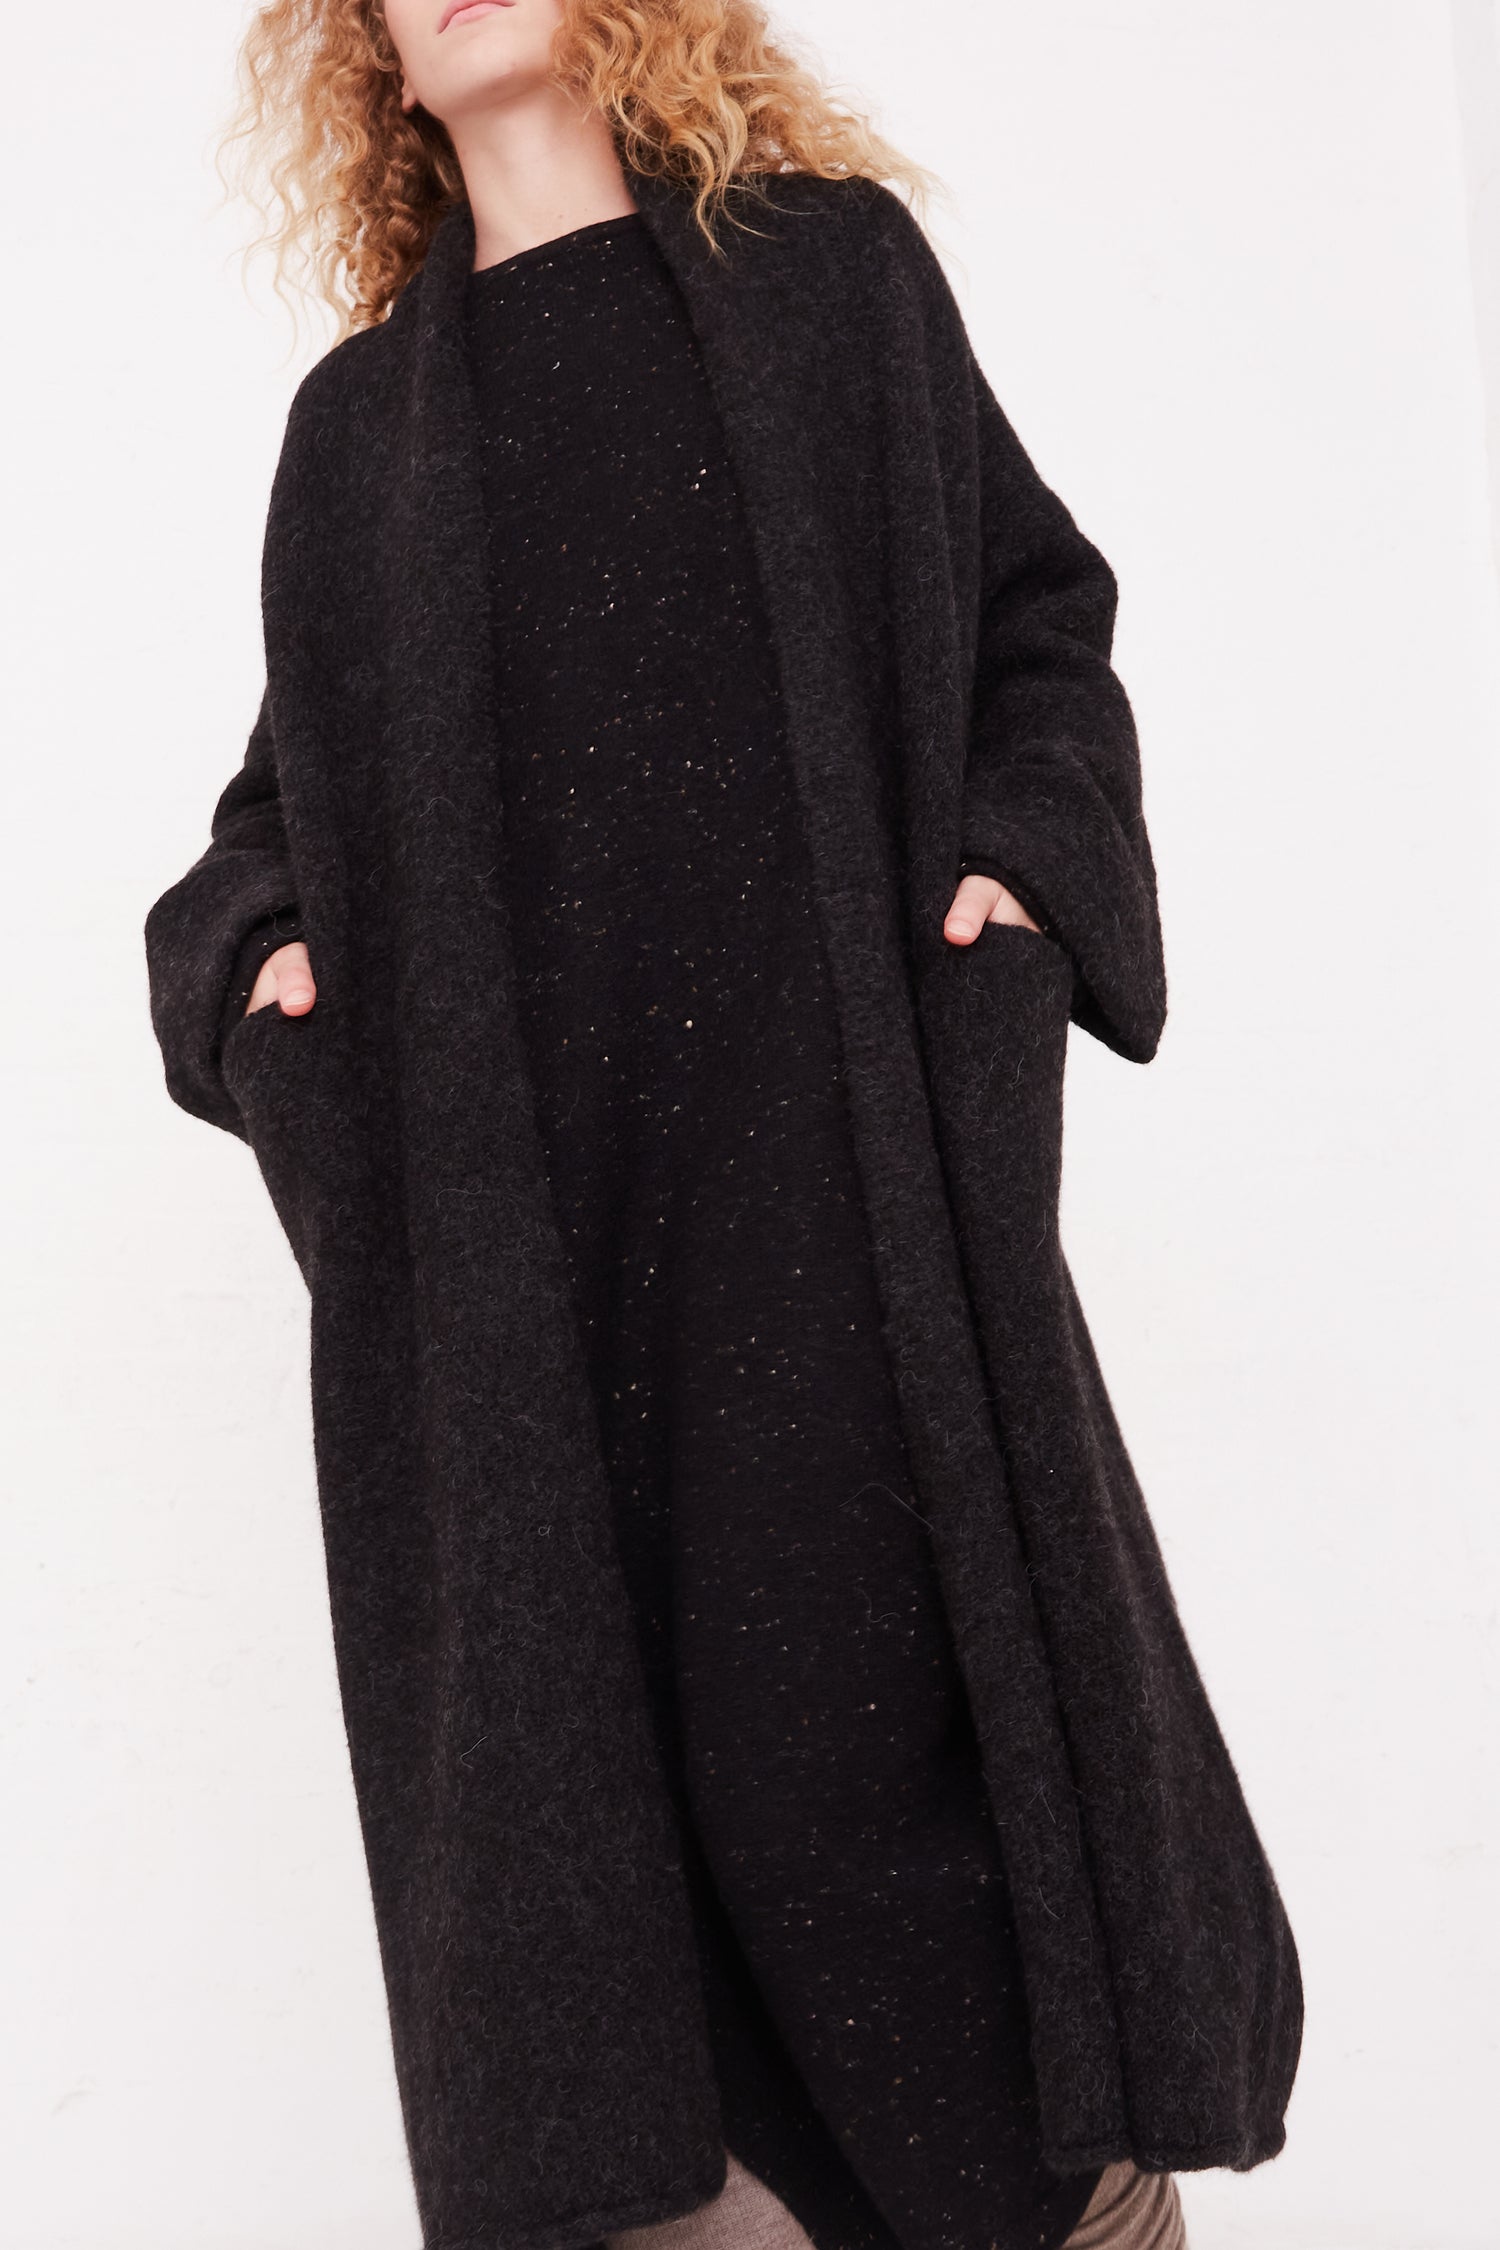 A woman wearing a black wool coat and Lauren Manoogian Long Shawl Cardigan in Black.